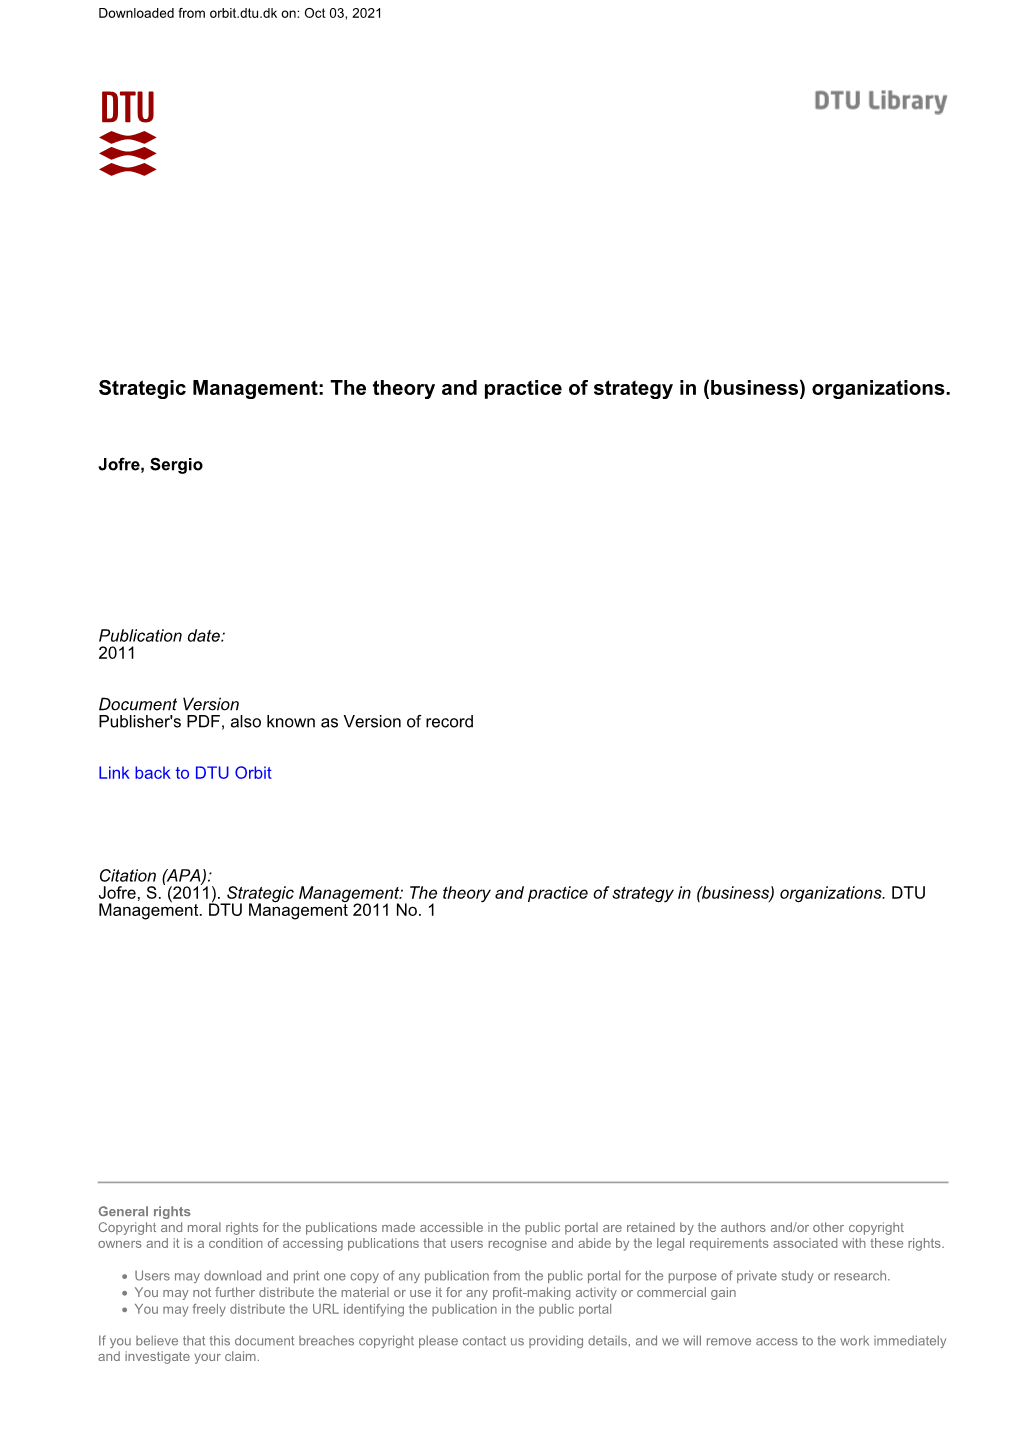 Strategic Management: the Theory and Practice of Strategy in (Business) Organizations